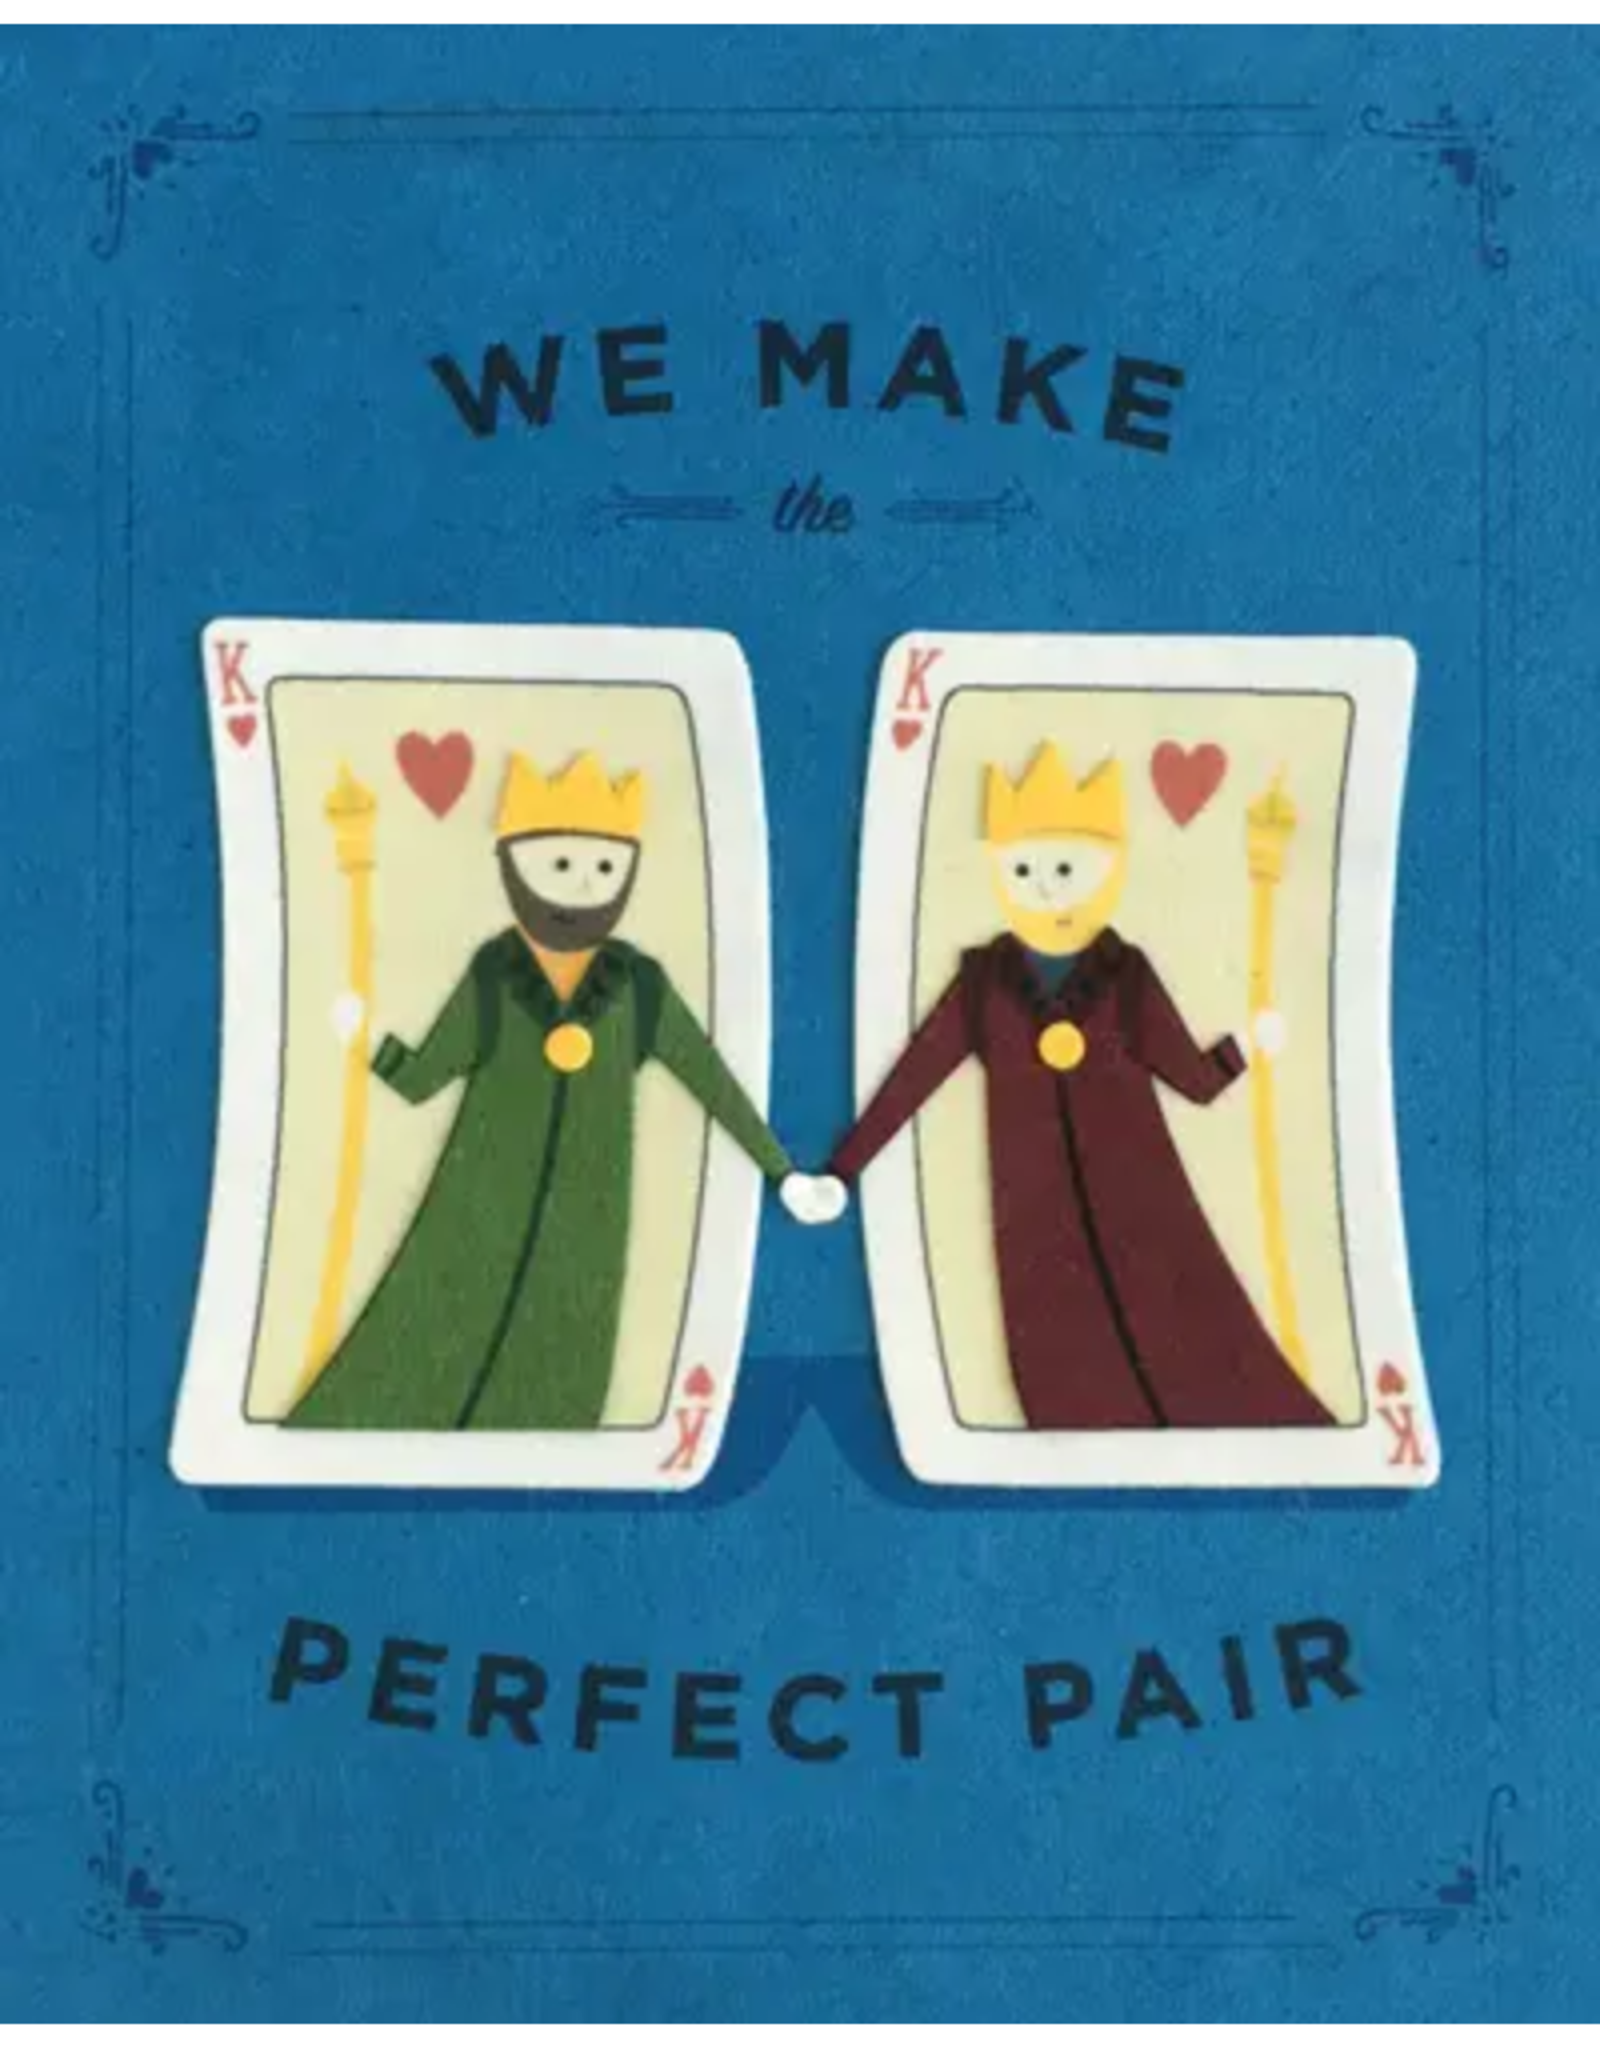 Philippines Card Perfect Pair Kings  - Philippines